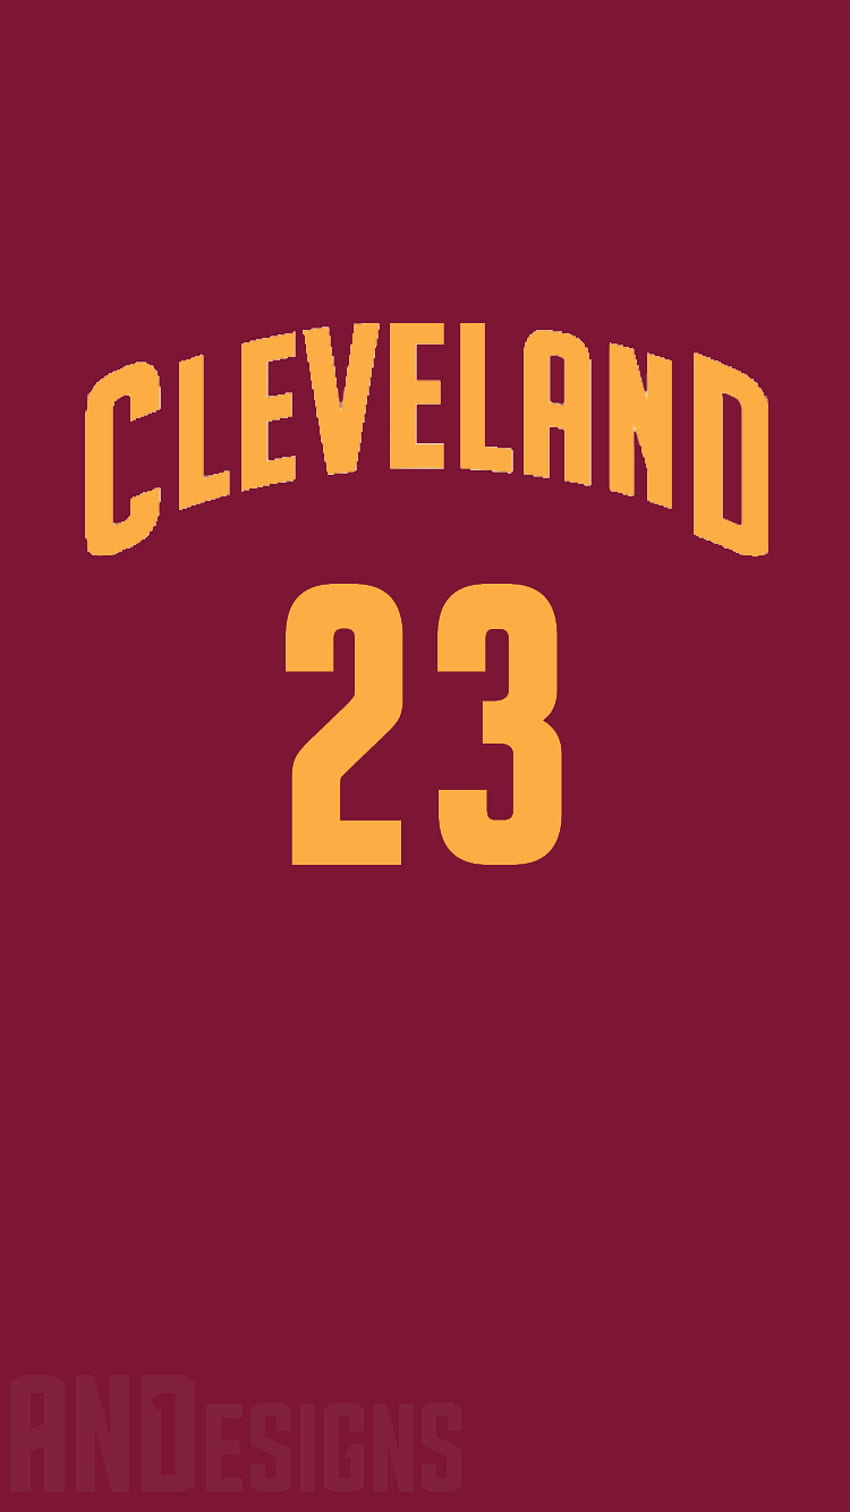 The other number 23. Nba lebron james, Lebron james cleveland HD phone wallpaper